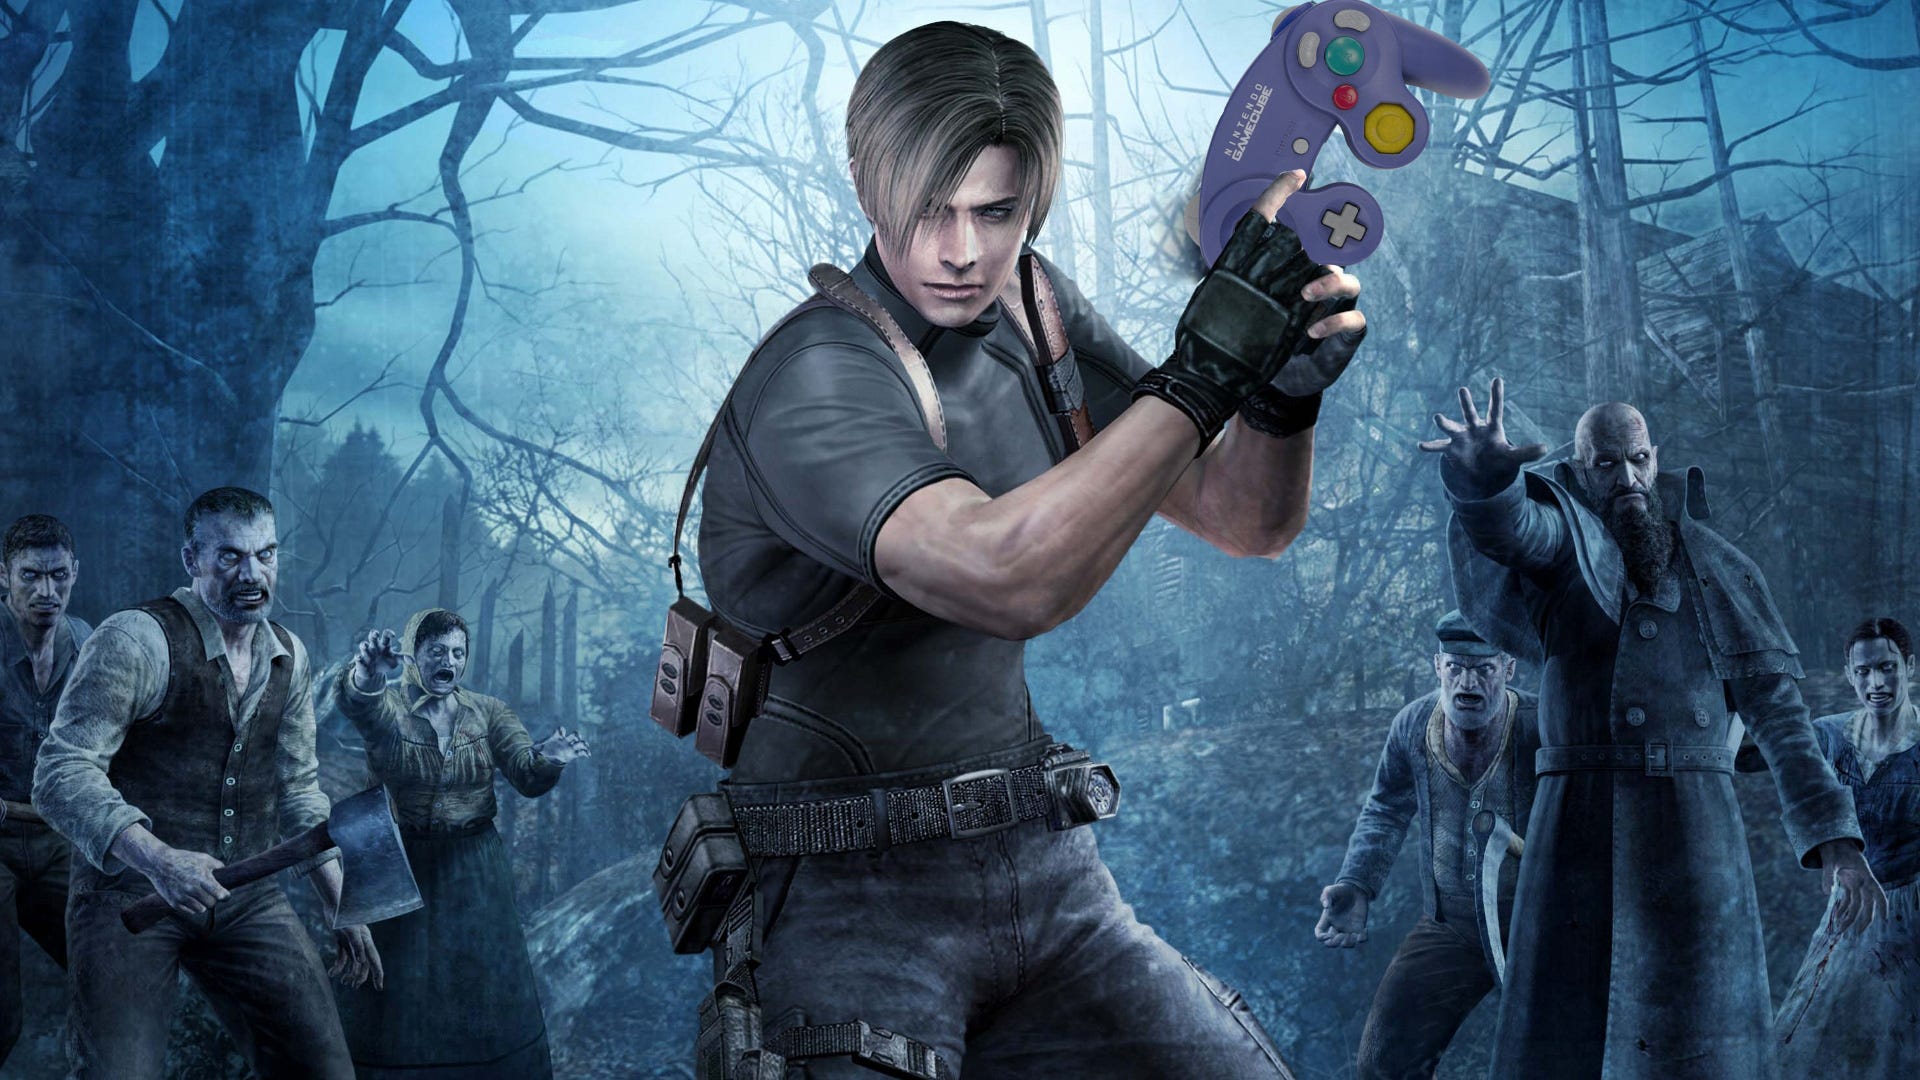 raken Microprocessor Uil Resident Evil 4's tank controls were not, and are not, a problem | VG247